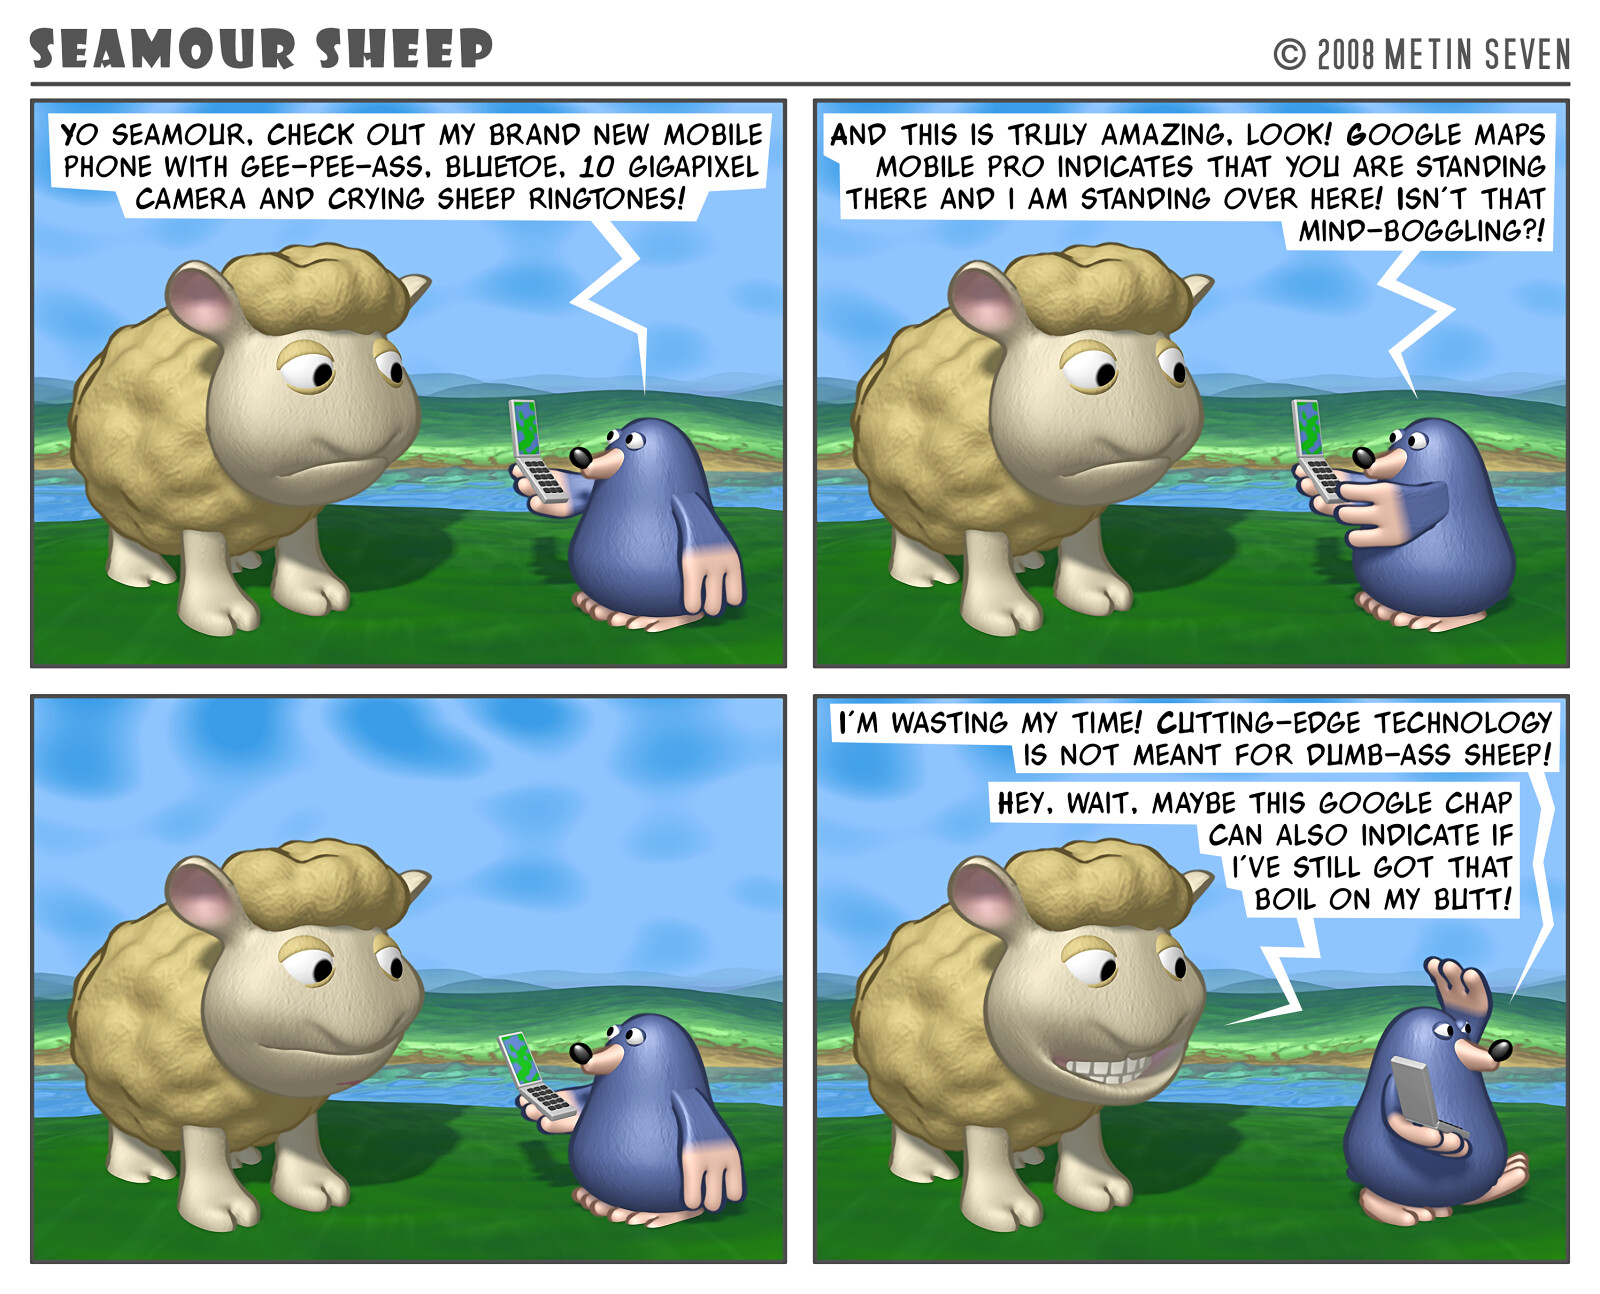 Seamour Sheep and Marty Mole comic strip episode: Mobile technology